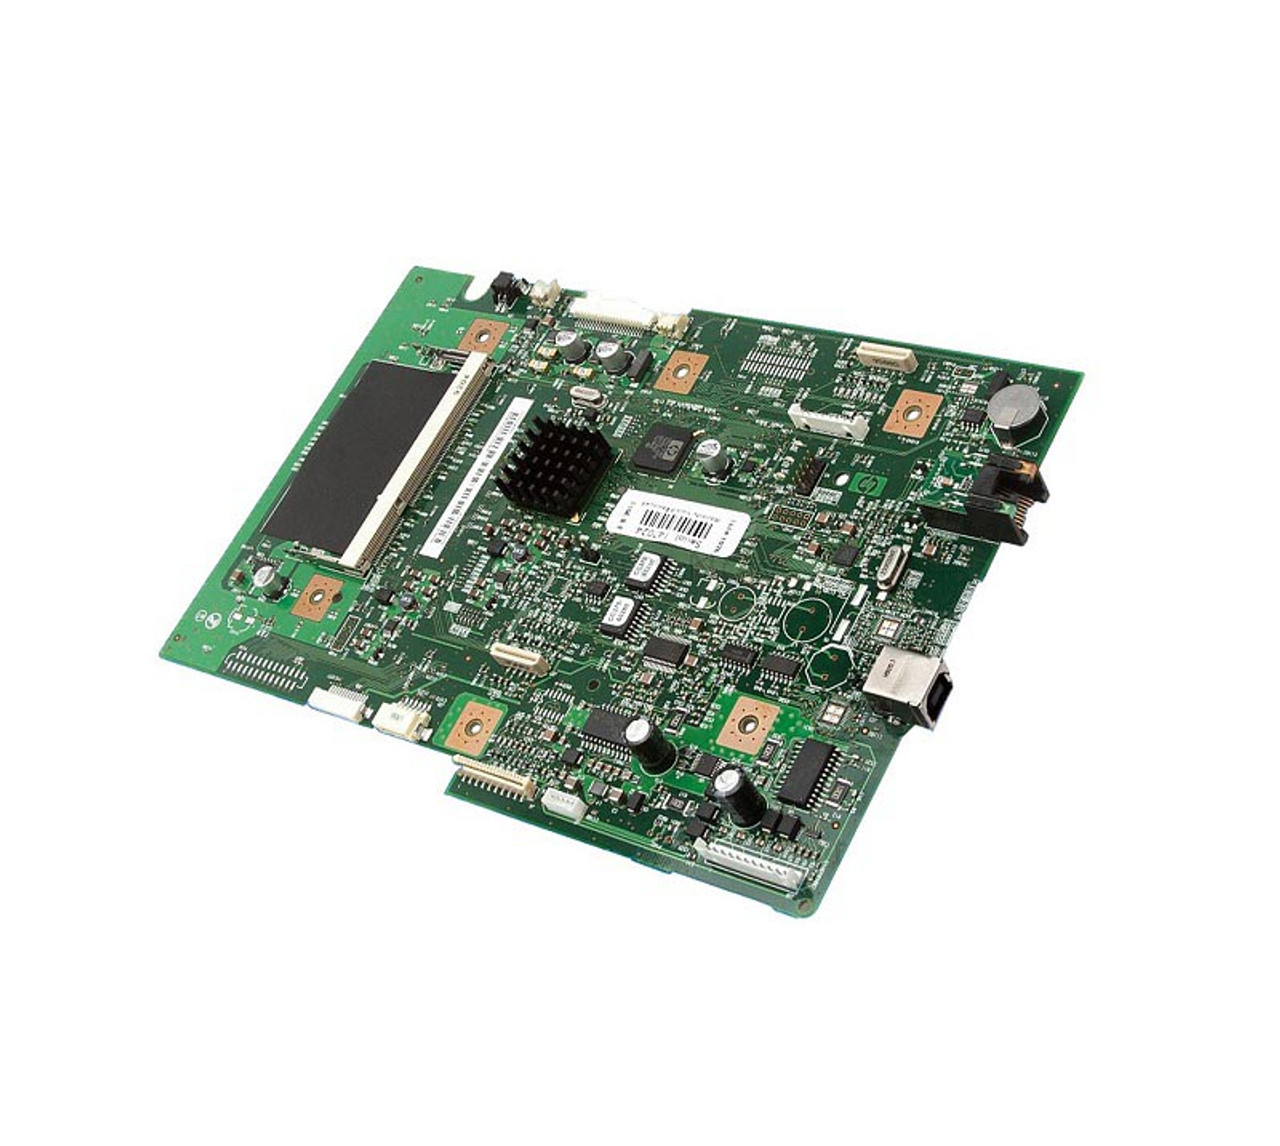 Q3659-60003 - HP Formatter Board with Firmware for CLJ 9500 Series